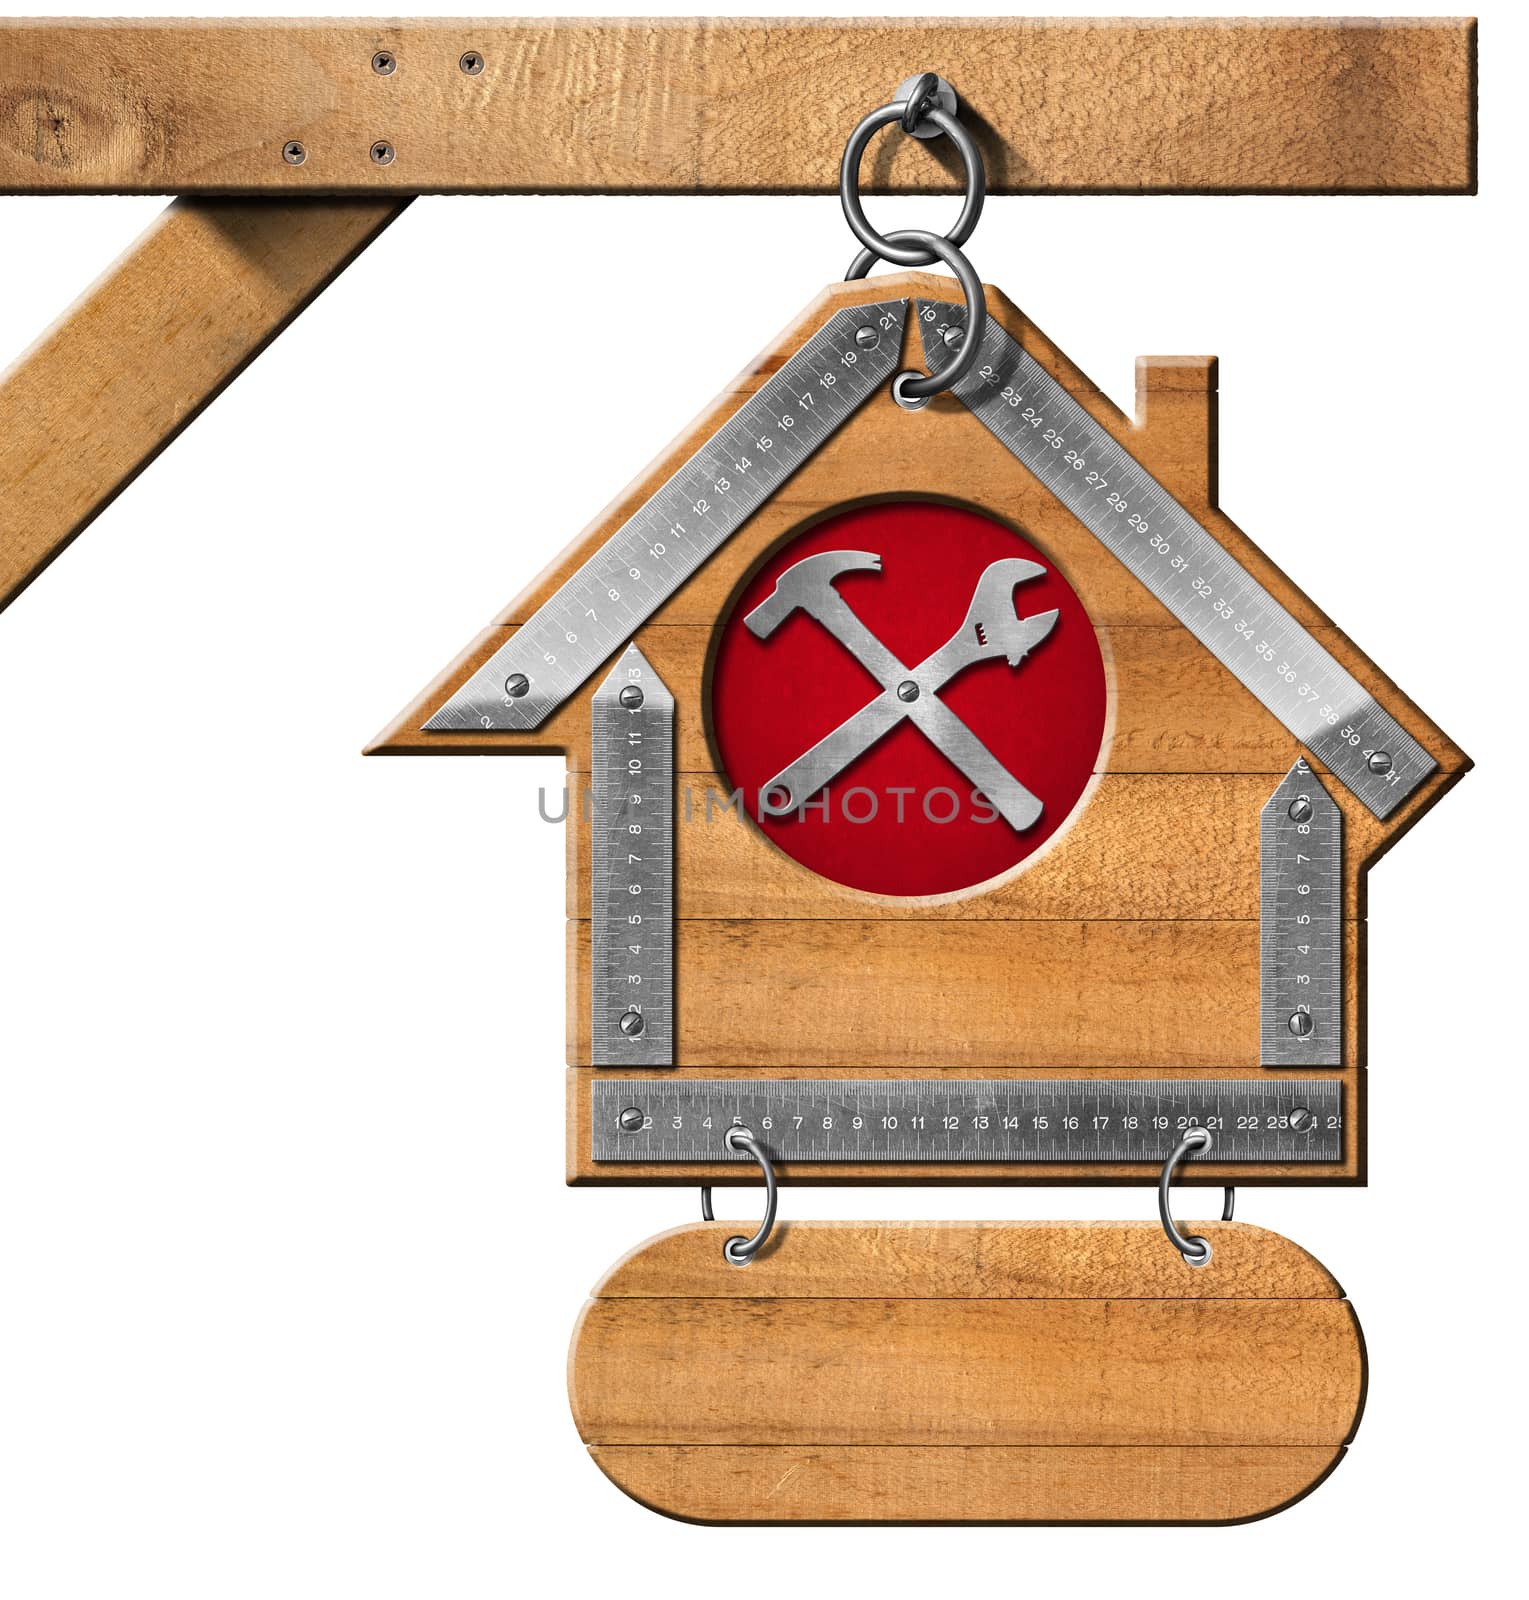 Wooden and metallic sign in the shape of house with a symbol with hammer and wrench. Hanging from a metal chain and isolated on white background